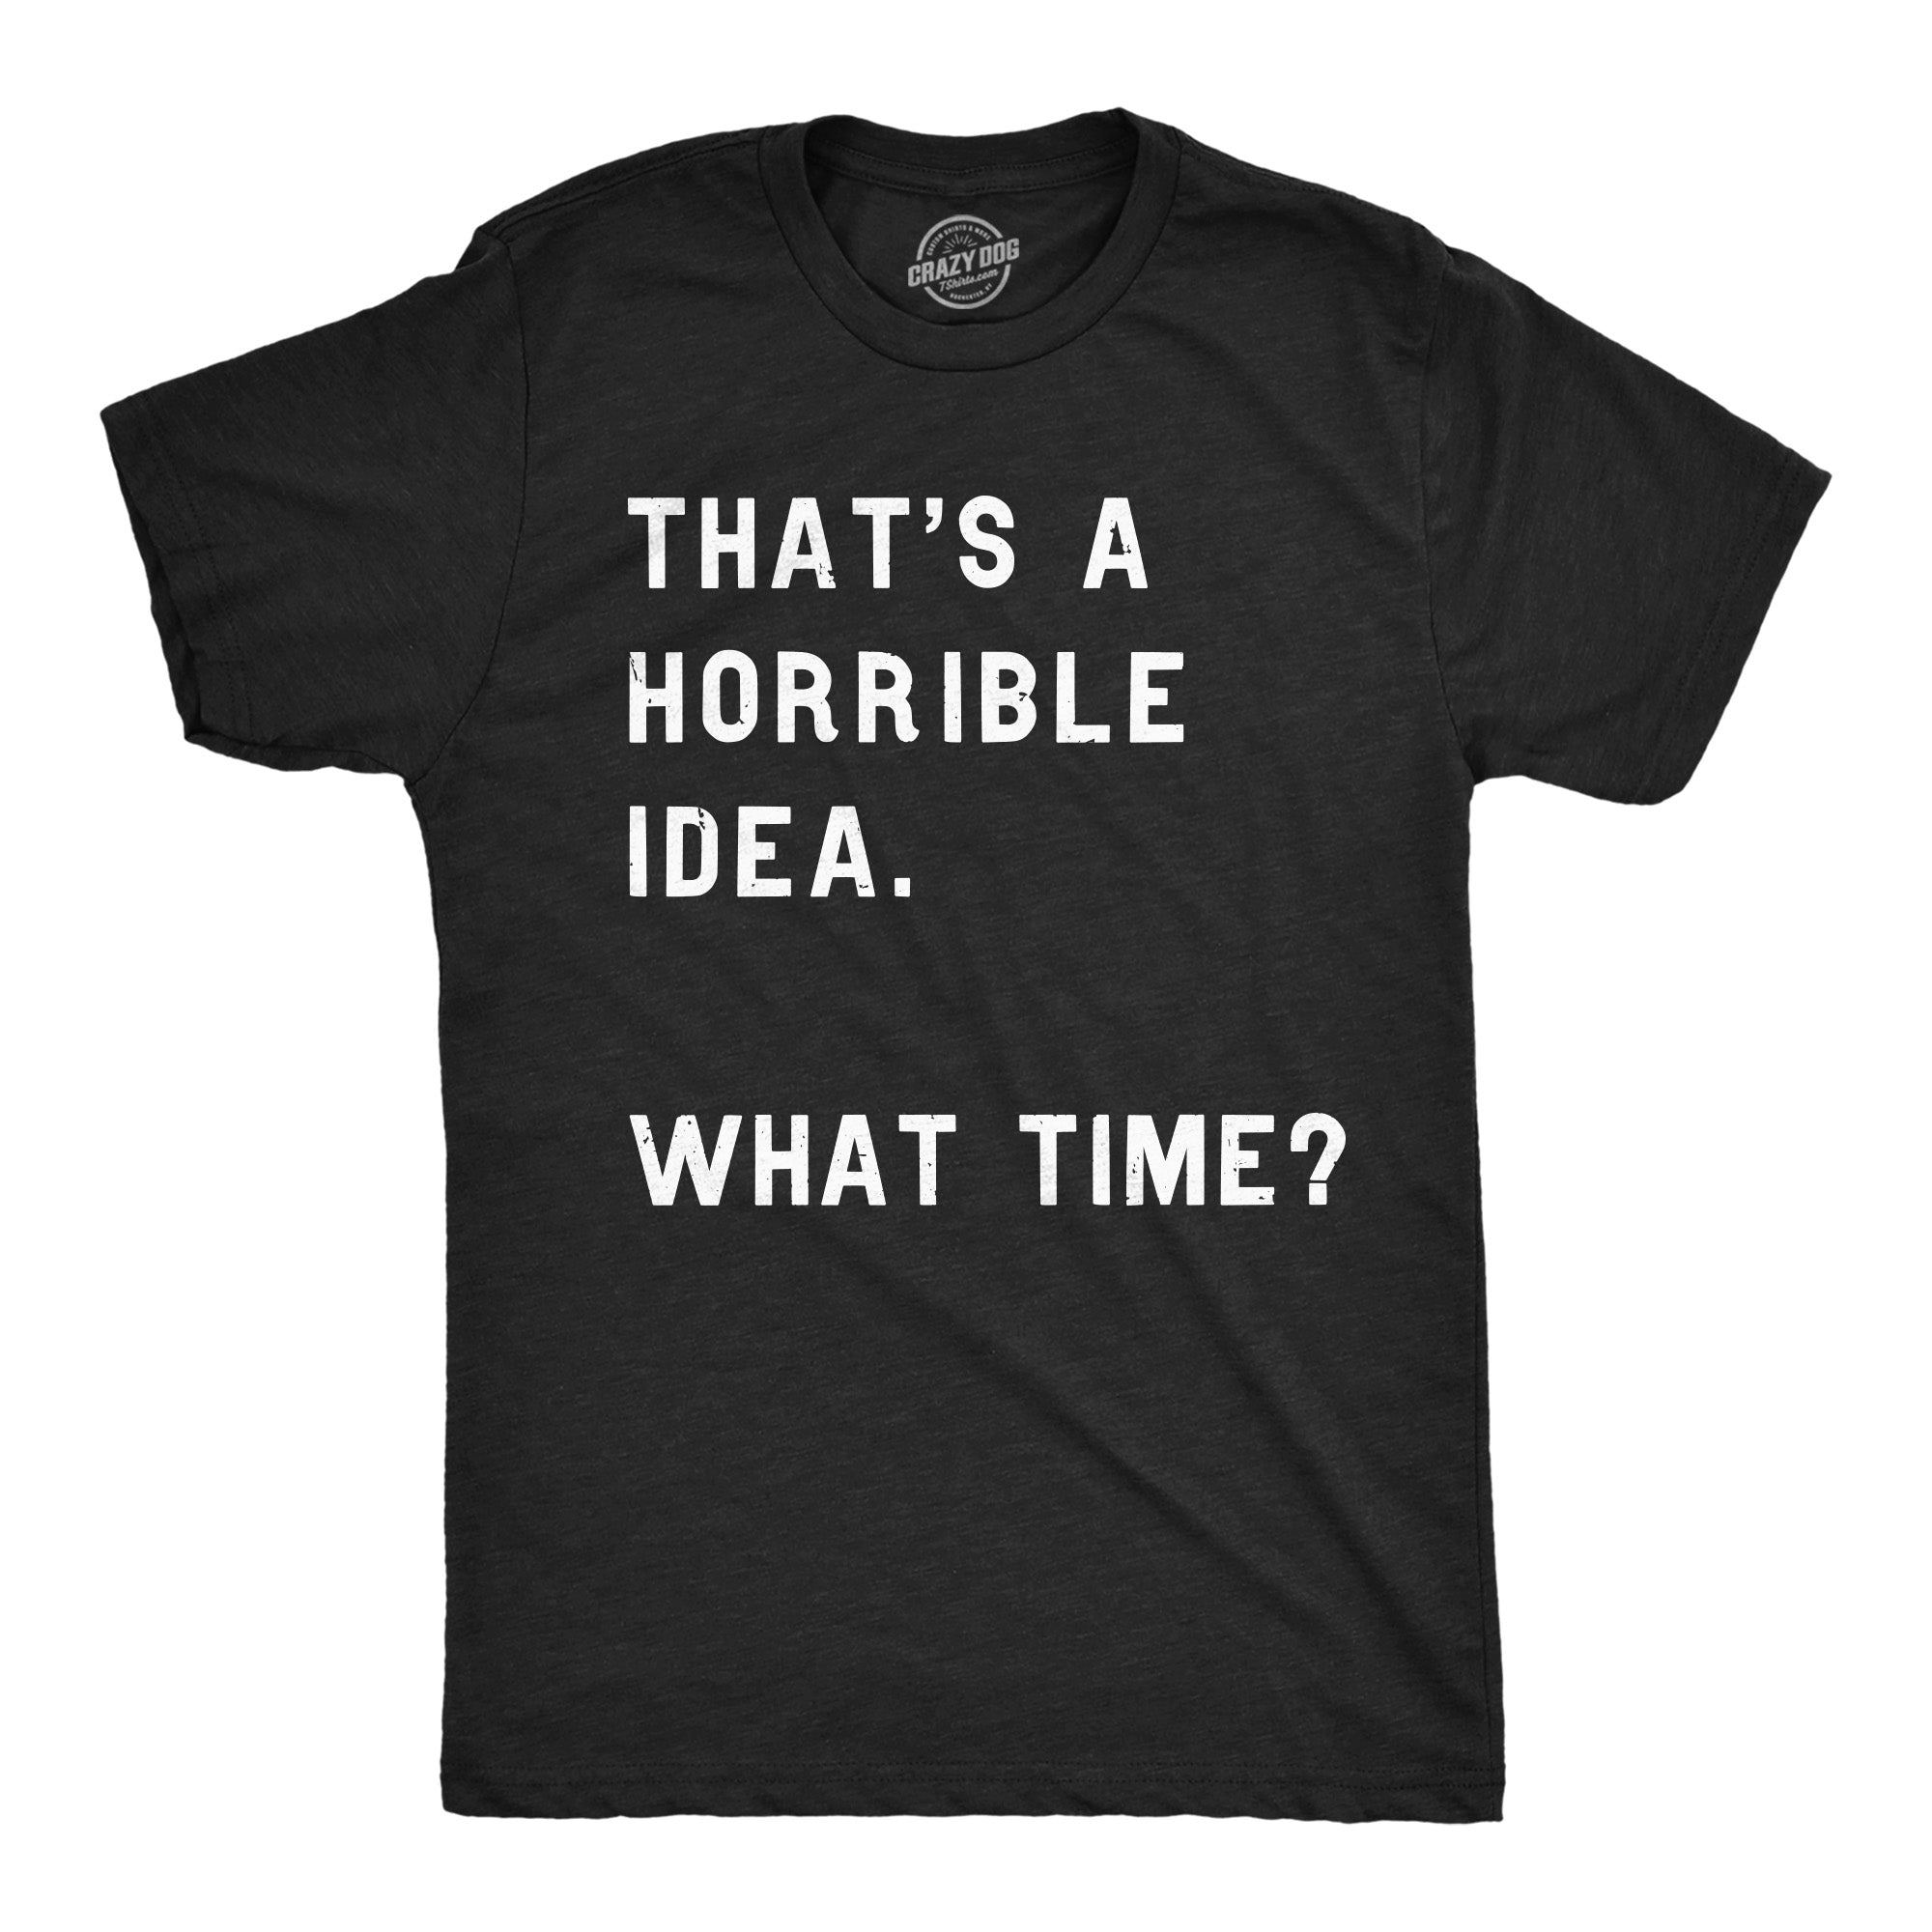 Funny Heather Black That Sounds Like A Horrible Idea. What Time? Mens T Shirt Nerdy Sarcastic Tee